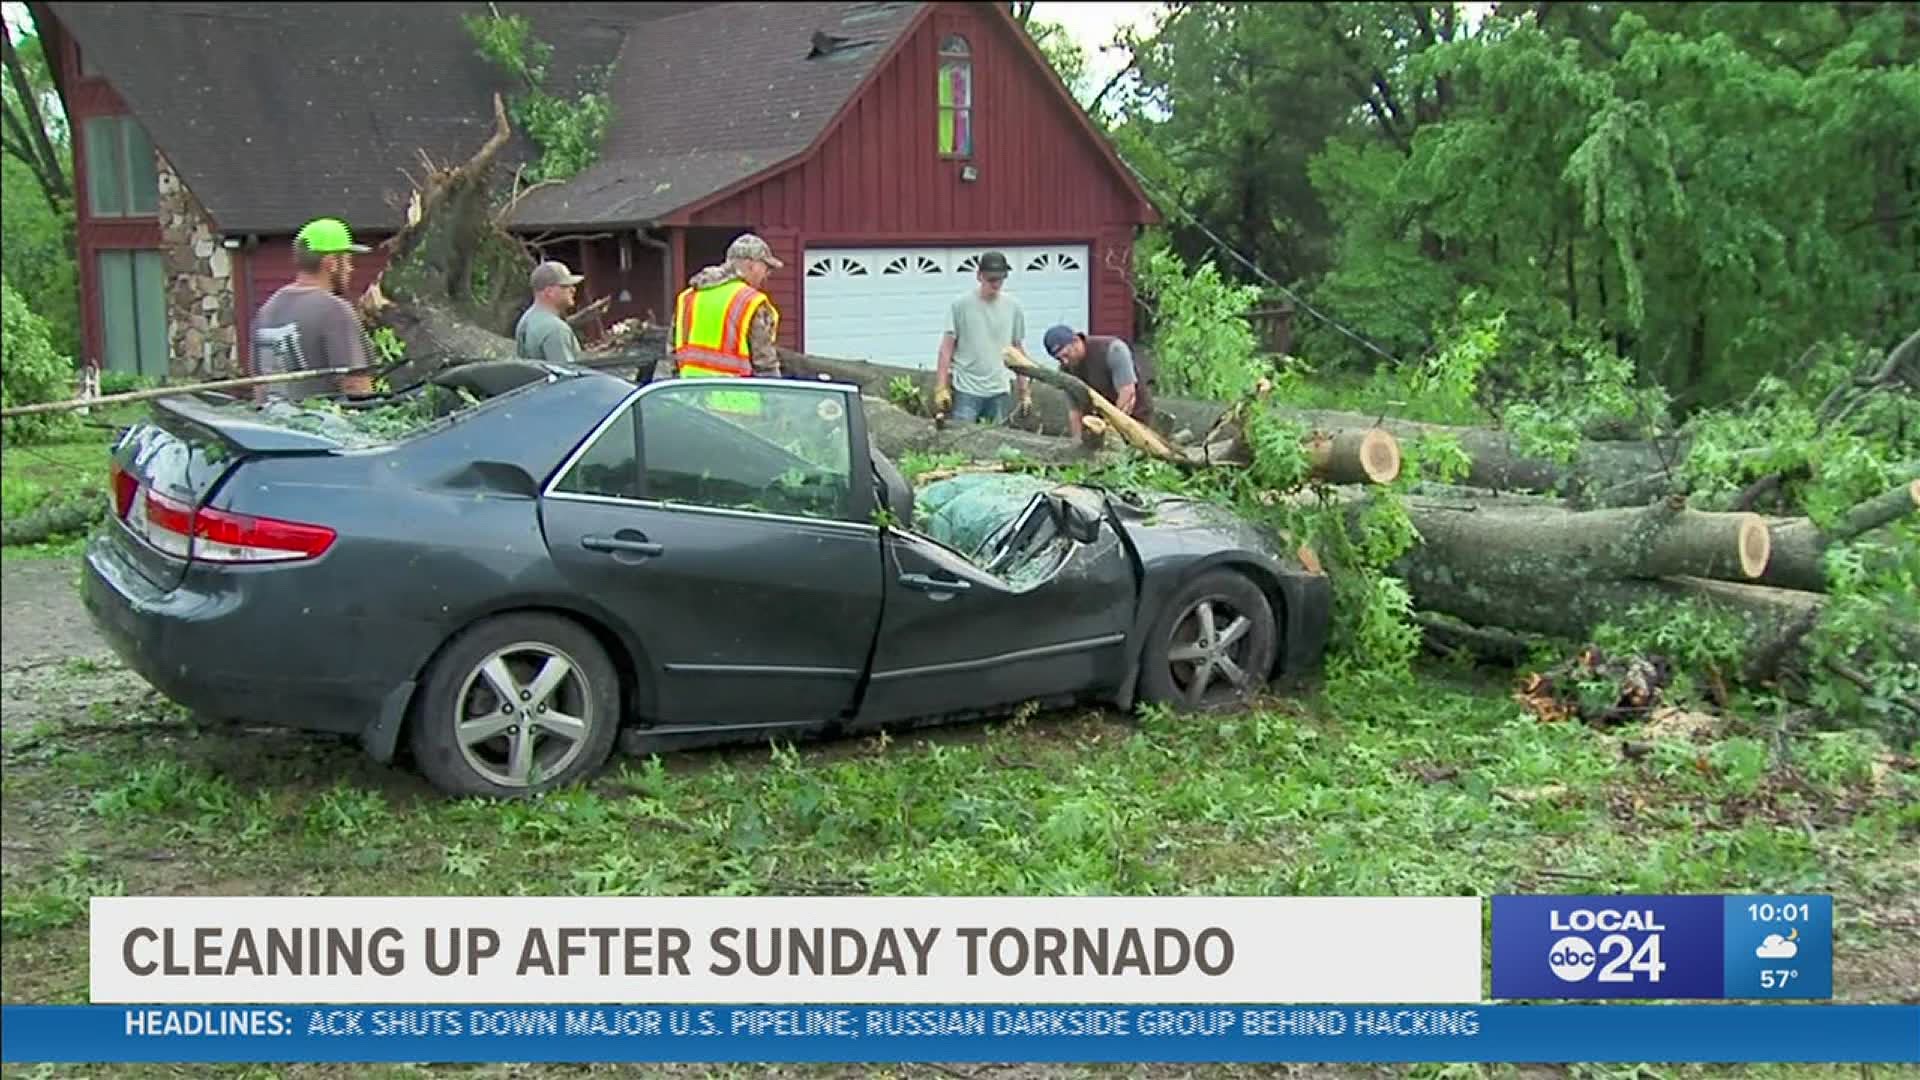 The tornado hit parts of Tipton County Sunday evening.